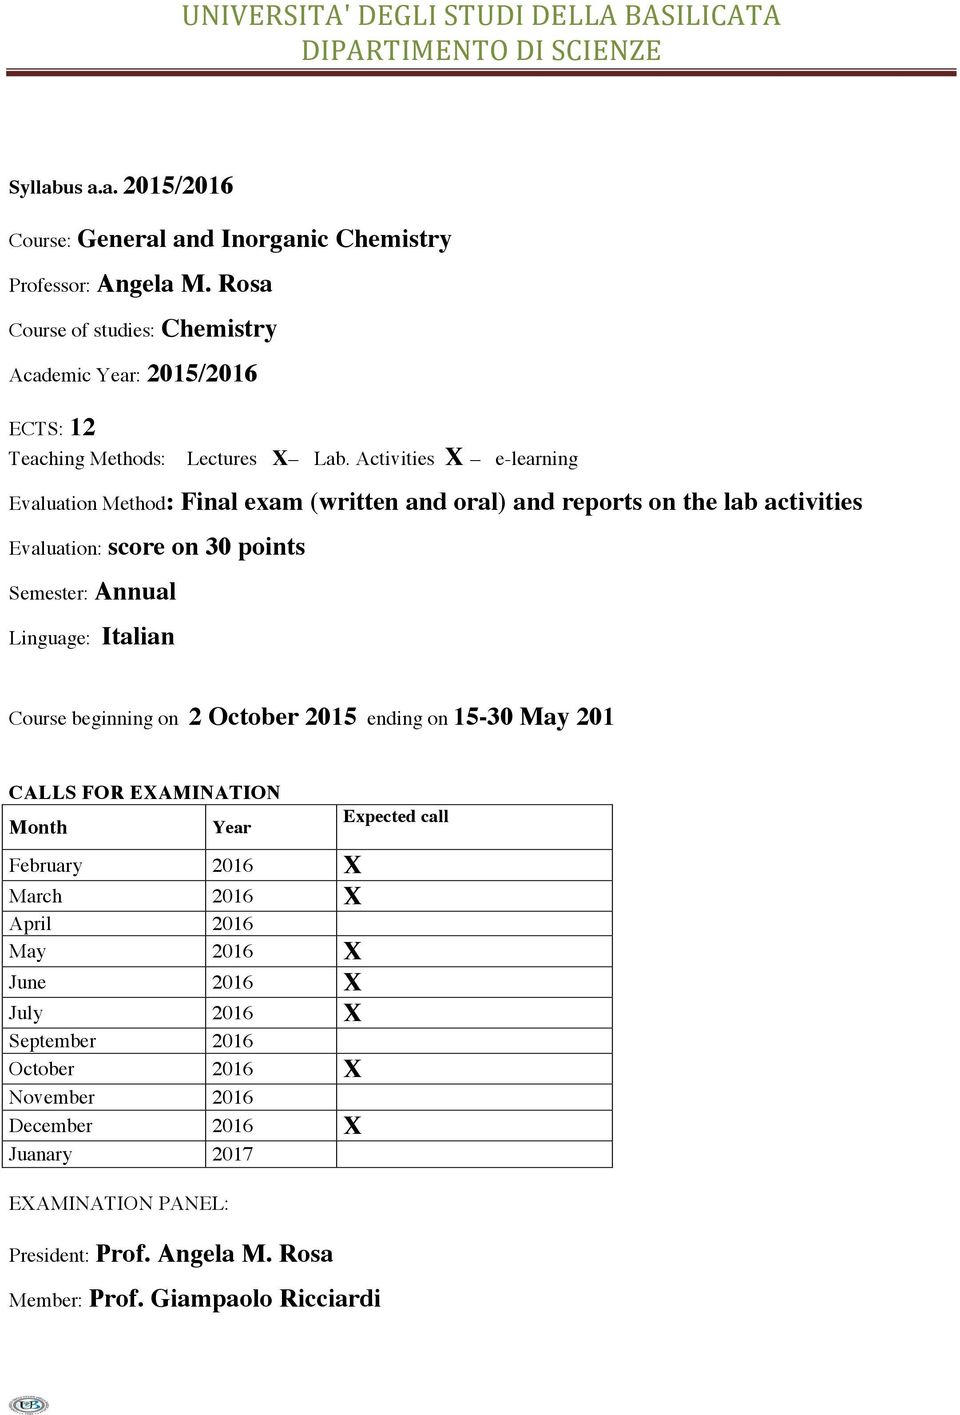 Activities X e-learning Evaluation Method: Final exam (written and oral) and reports on the lab activities Evaluation: score on 30 points Semester: Annual Linguage: Italian